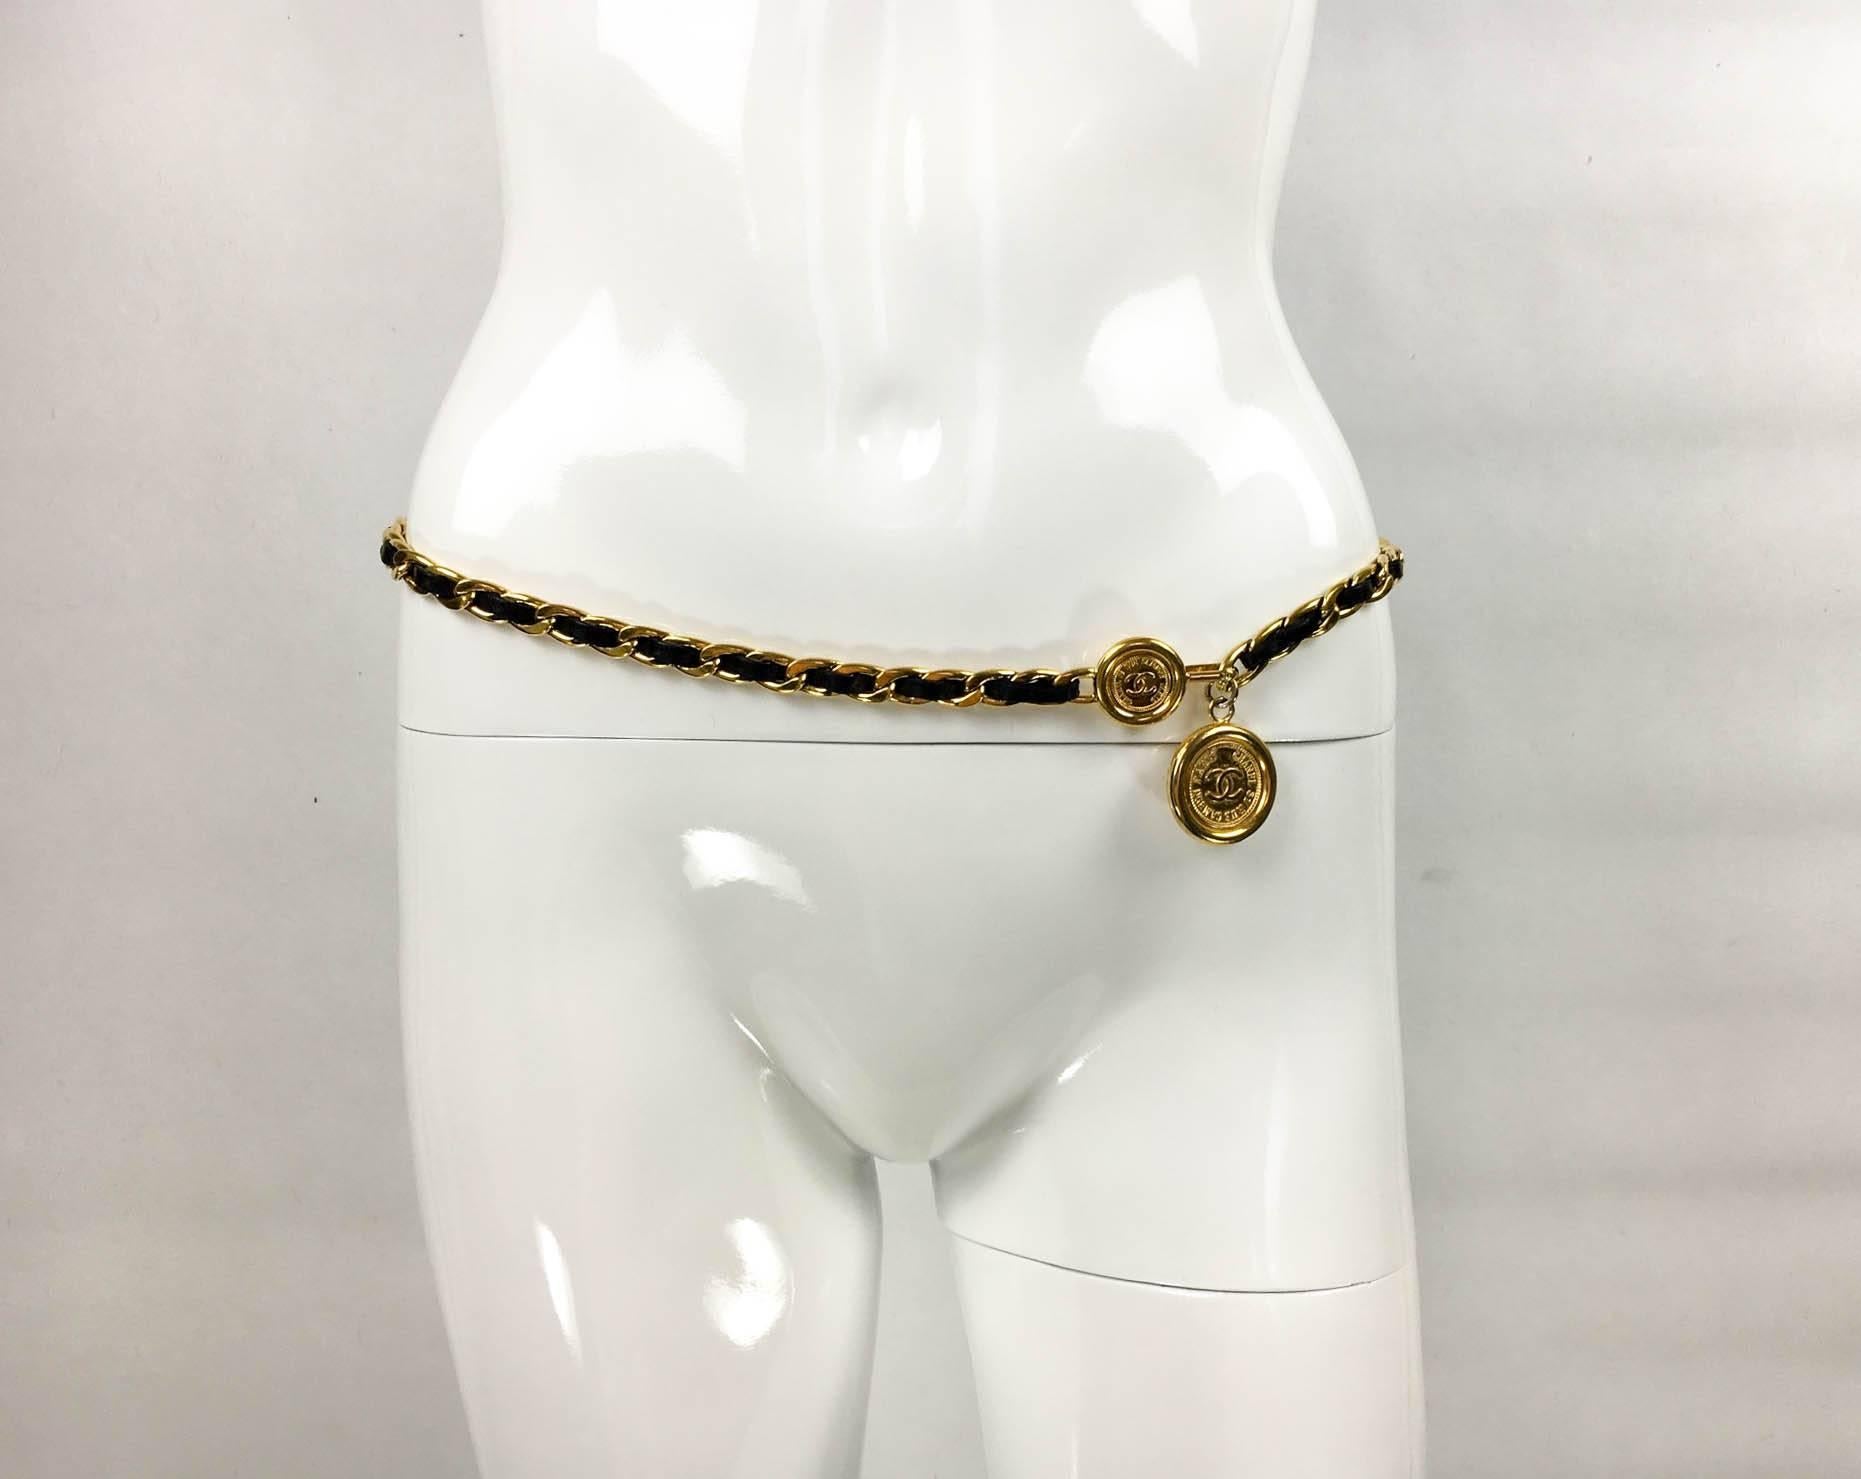 Gorgeous Vintage Chanel Belt / Necklace. This fabulous piece by Chanel dates back from the early 1990s, when superstar jewellery and accessories designer Victoire de Castellane was at the fashion house. With black leather woven into a gilt chain, it